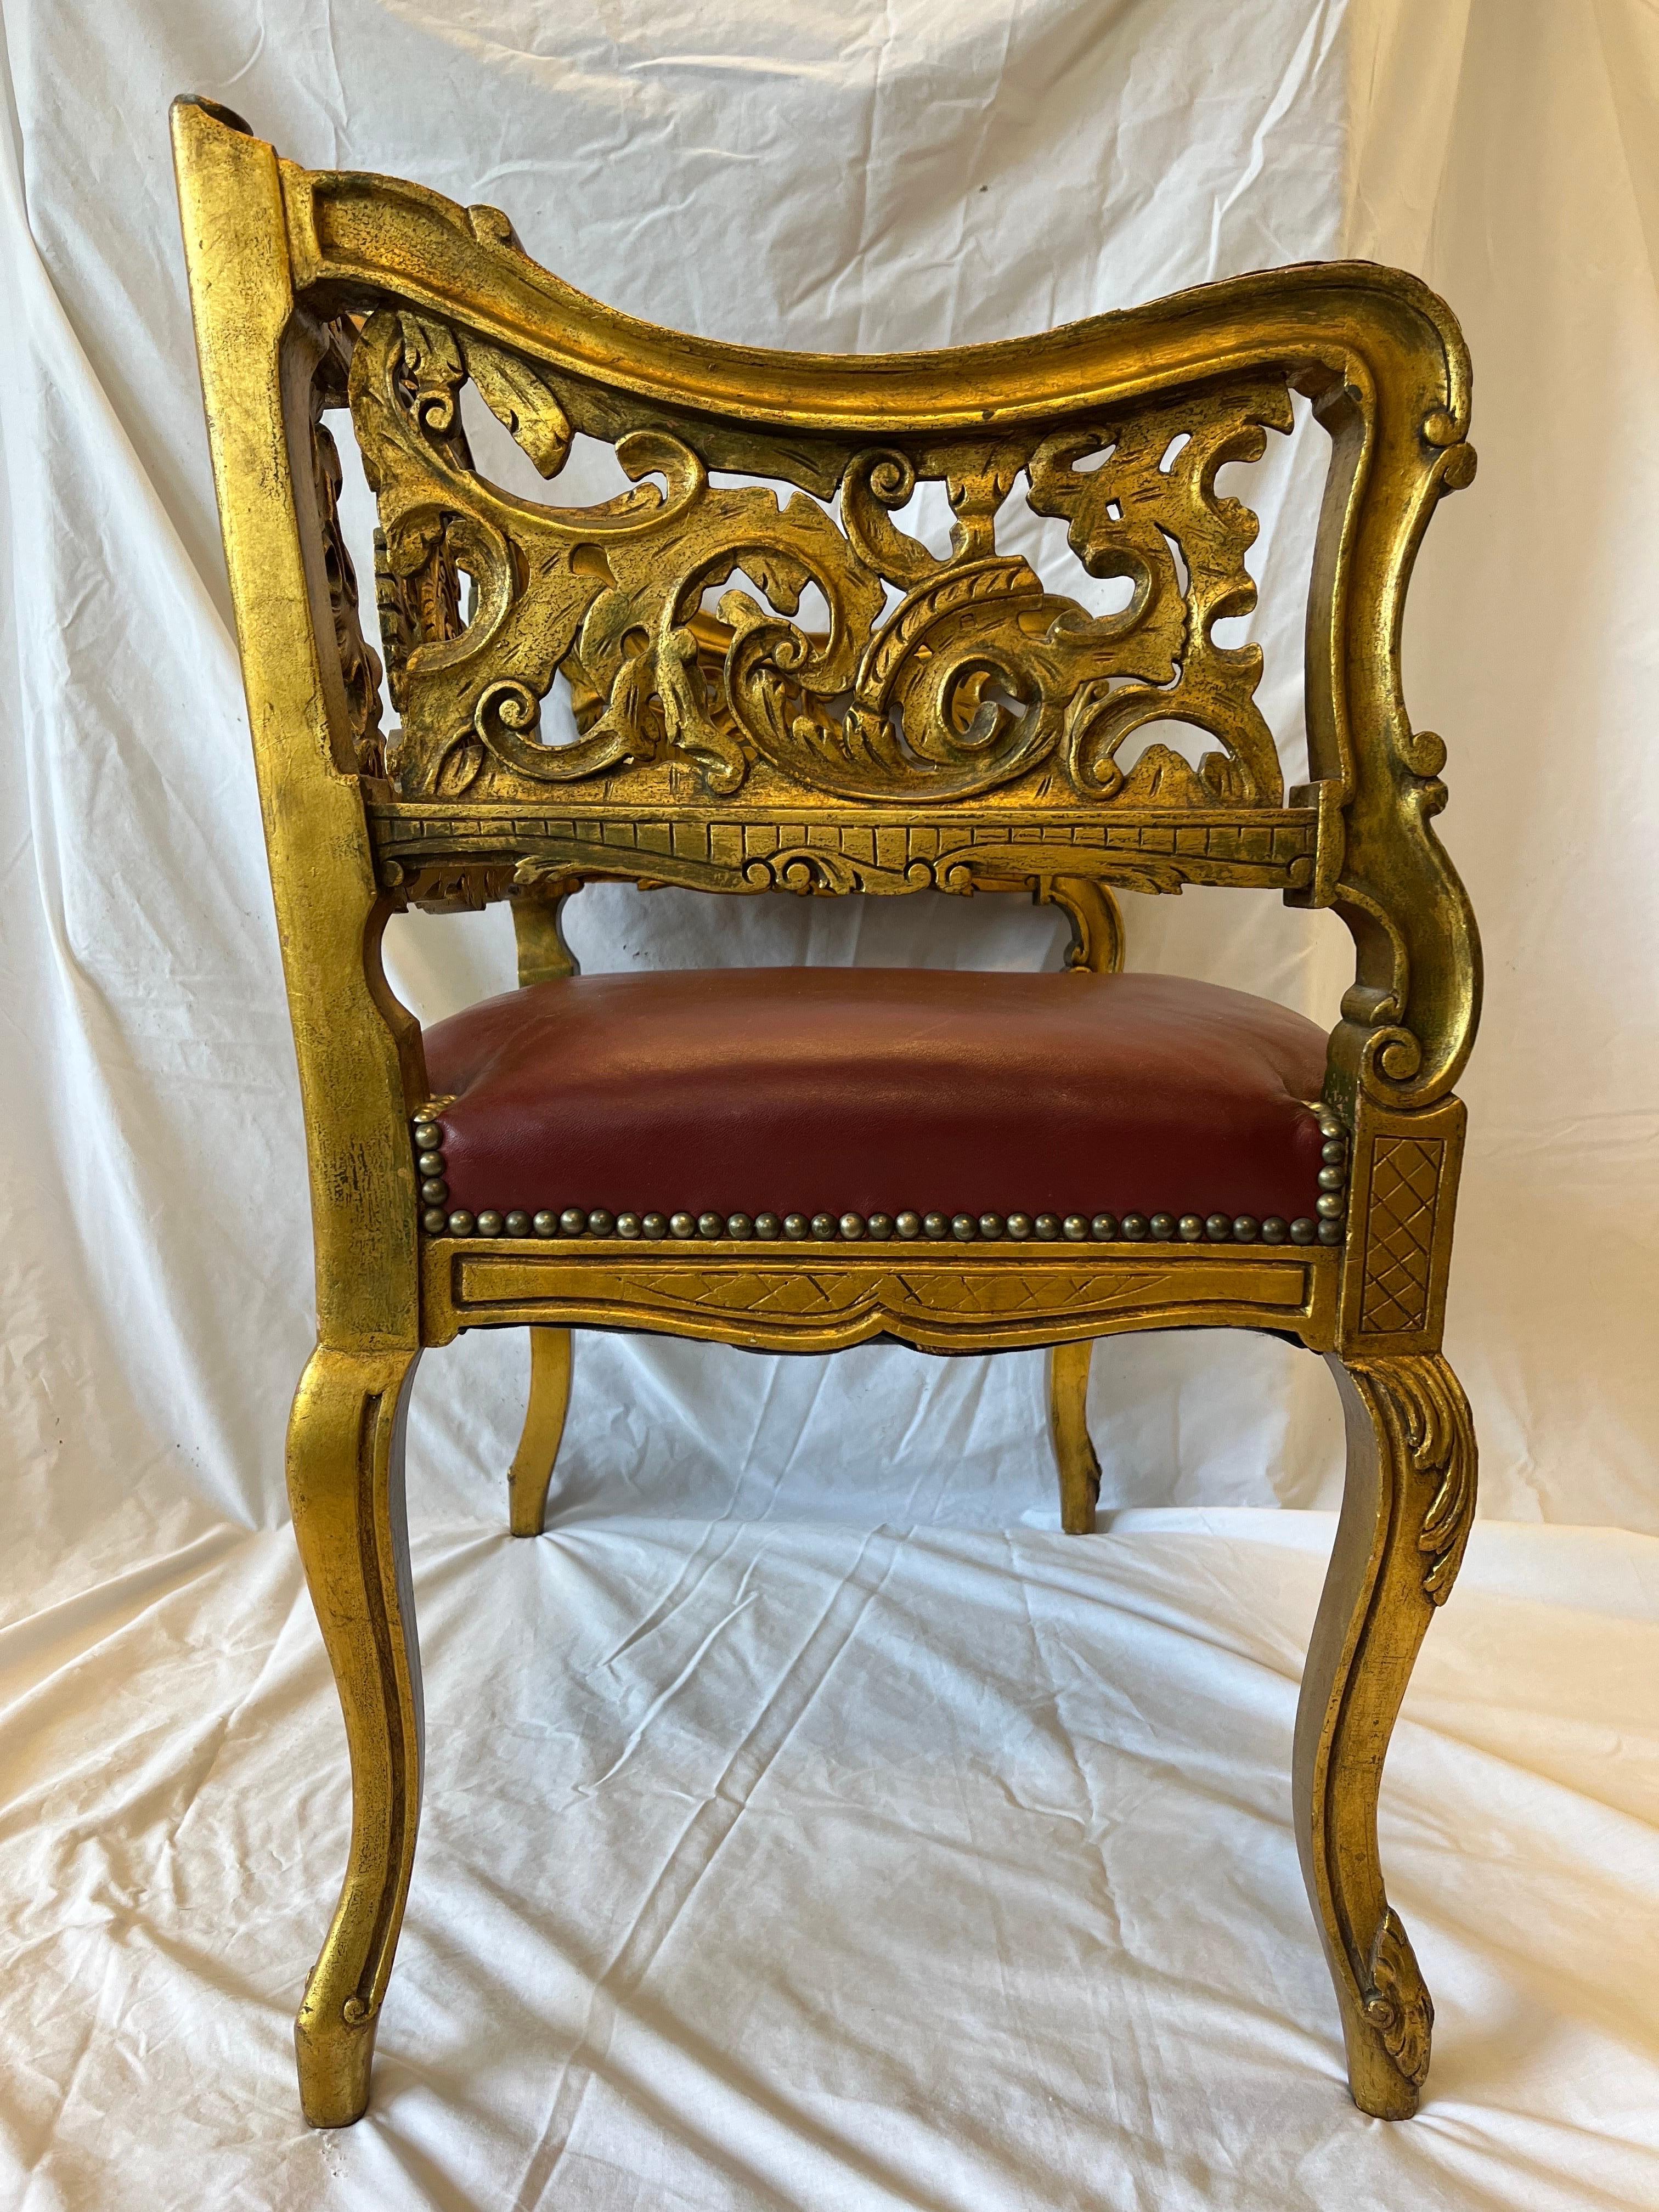 Antique Carved and Gilt Wood Arm Chair Bench Ornate Design Red Upholstered Seat For Sale 6